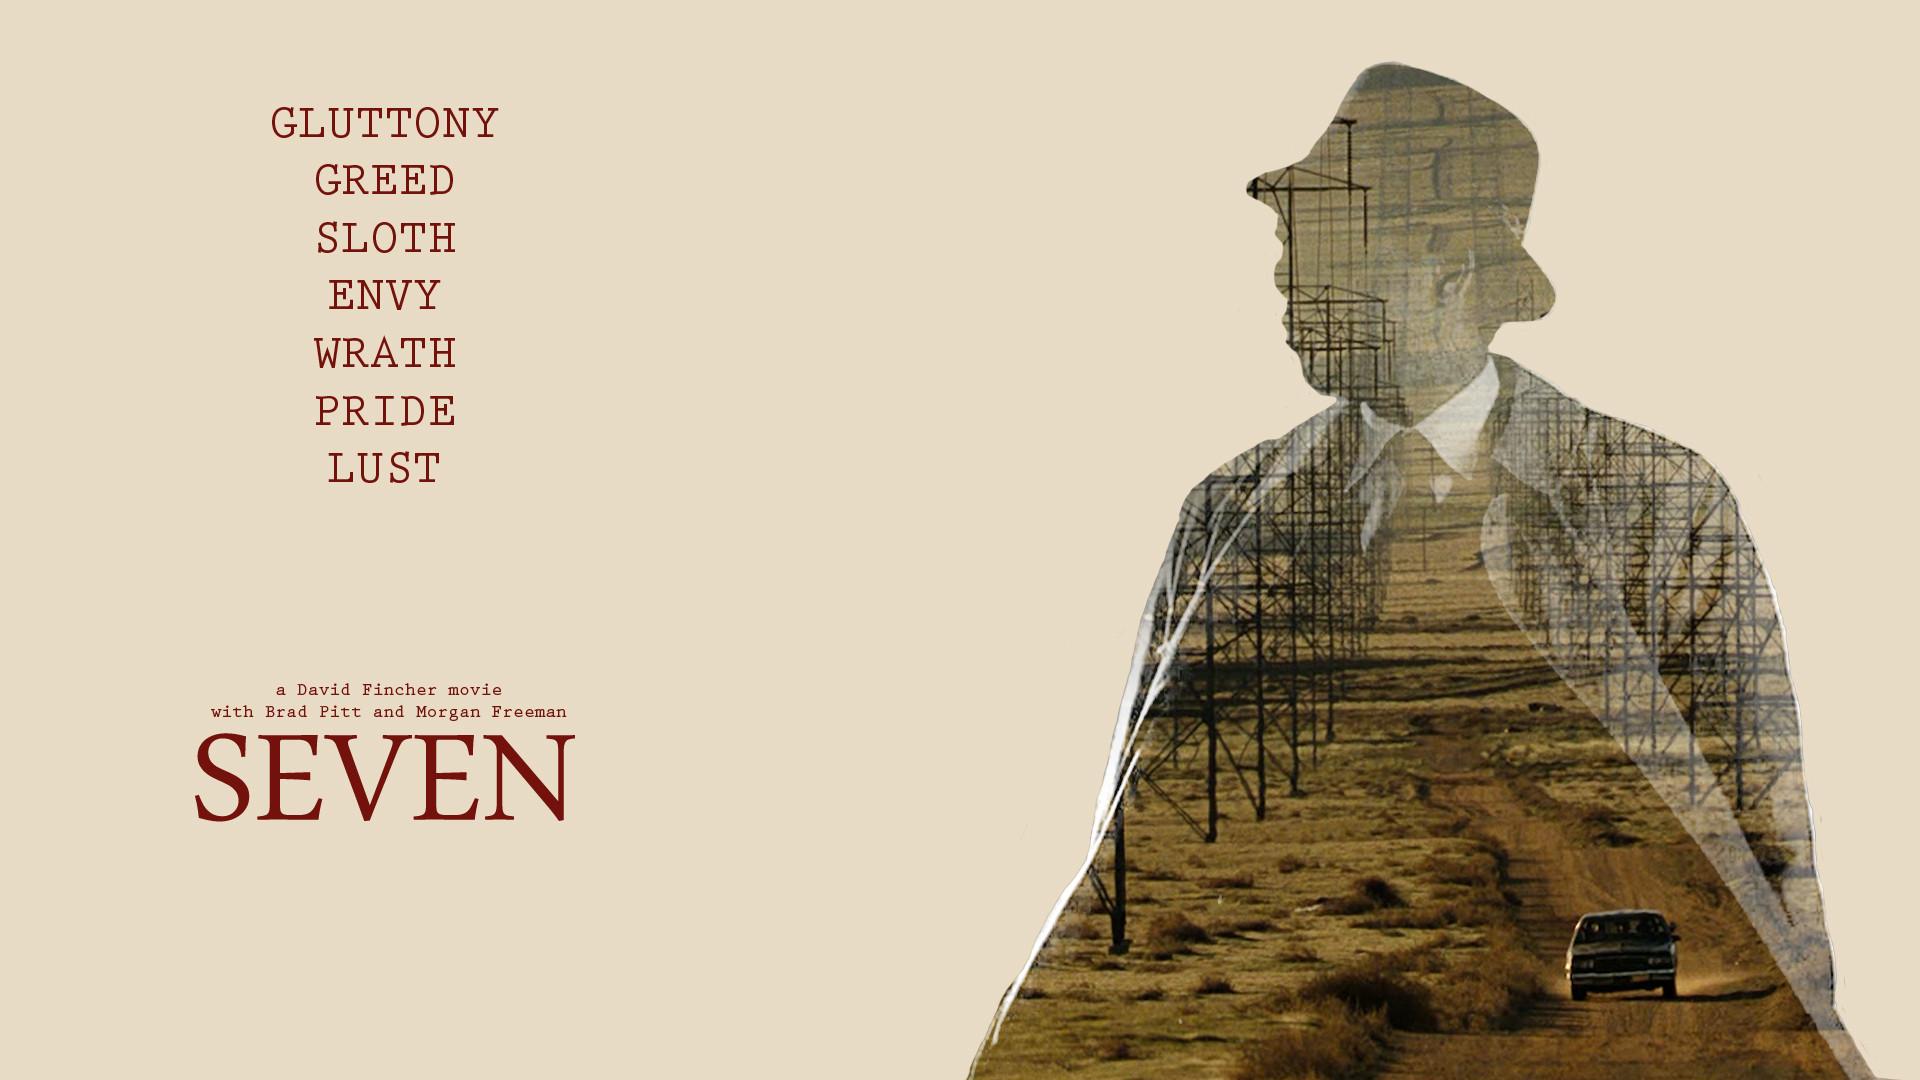 I made two wallpaper of the movie Se7en, hope you like